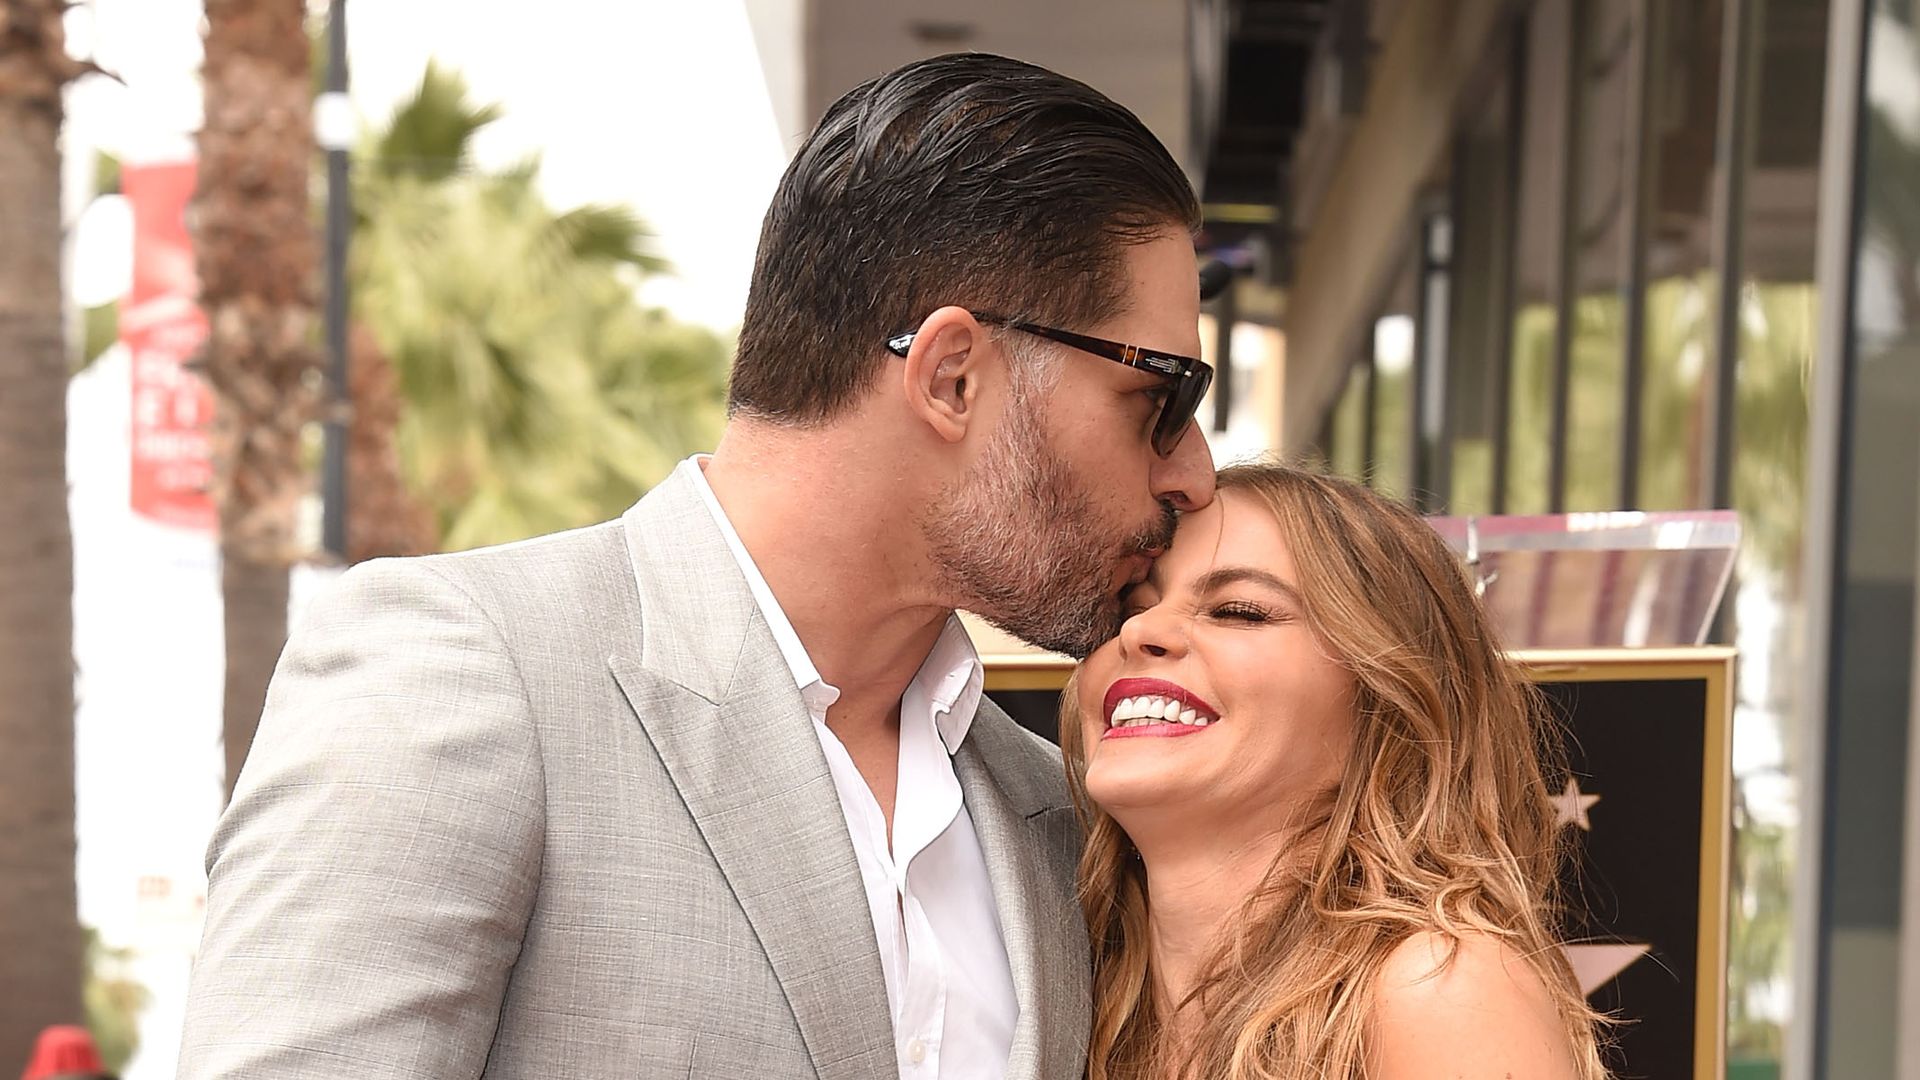 Joe Manganiello and Sofia Vergara Honored With Star On The Hollywood Walk Of Fame on May 7, 2015 in Hollywood, California